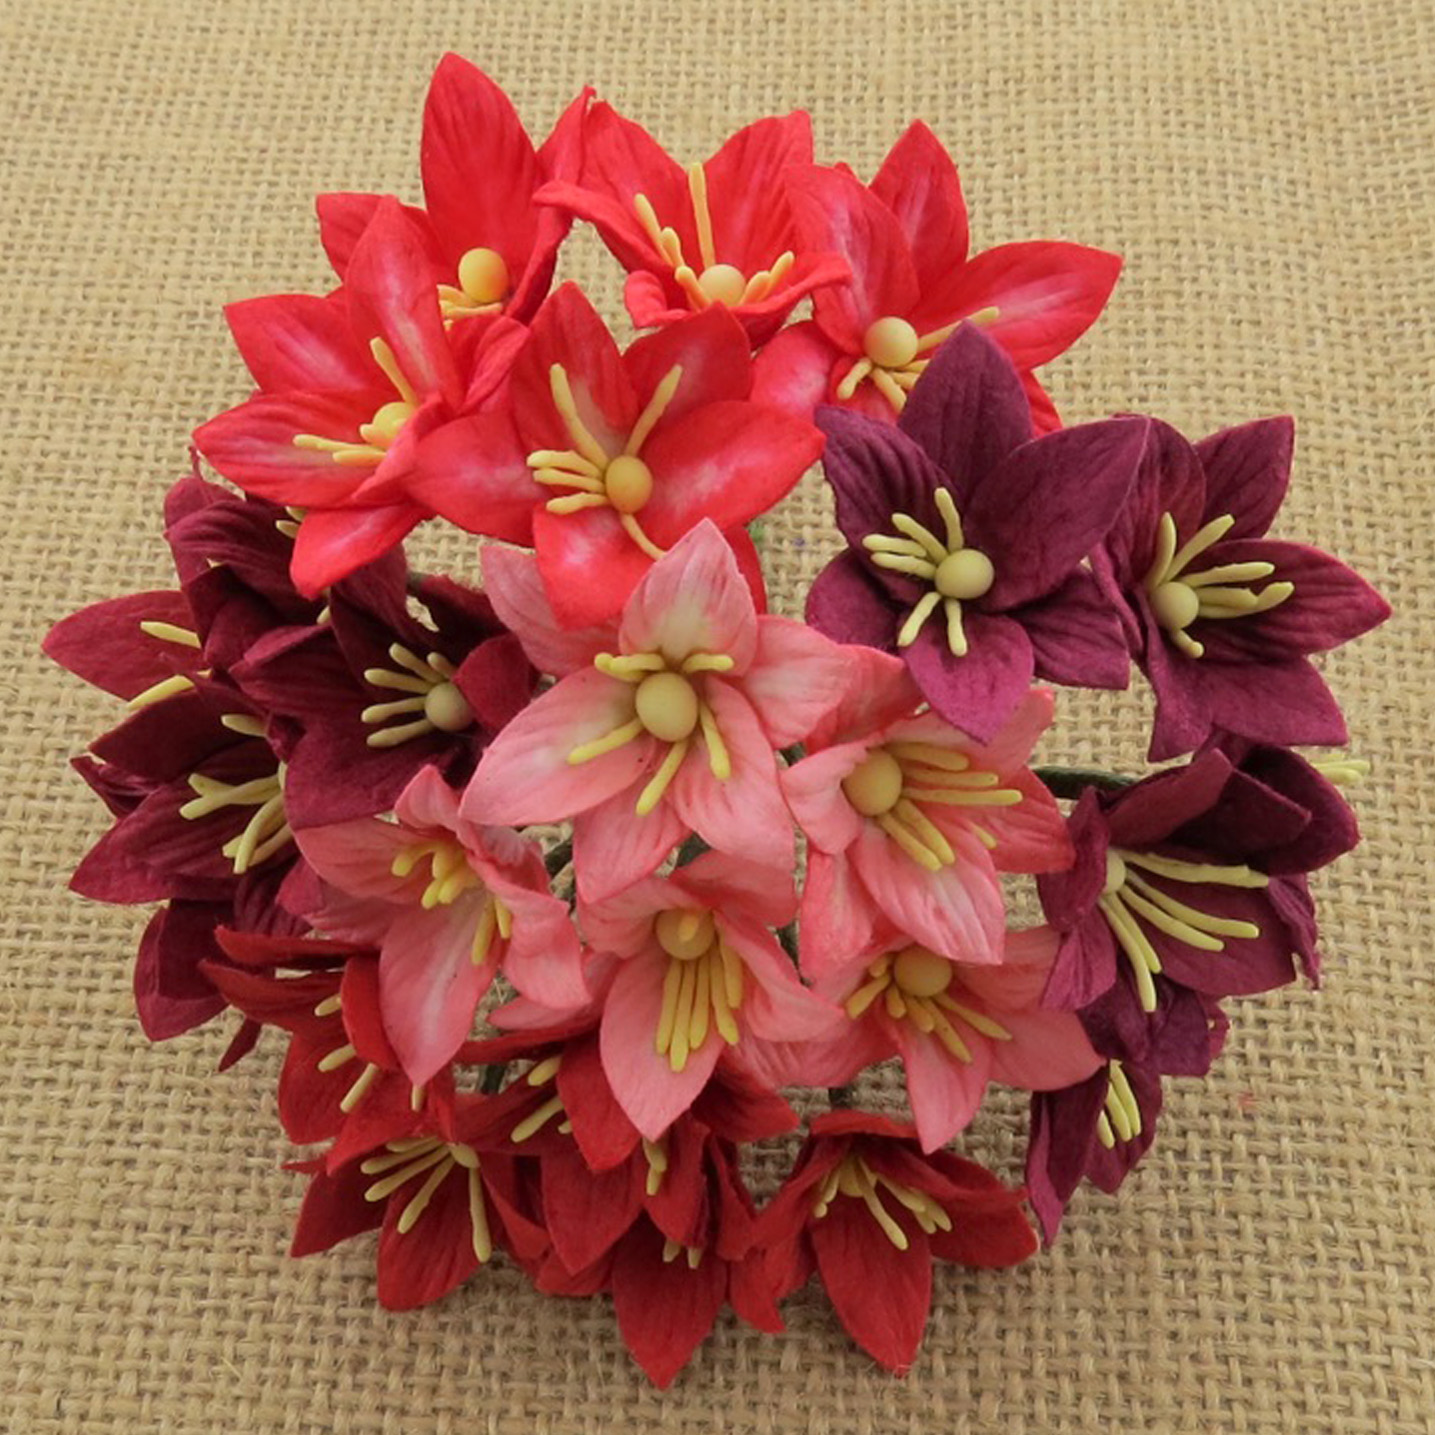 50 MIXED RED MULBERRY PAPER LILY FLOWERS - 5 COLOR